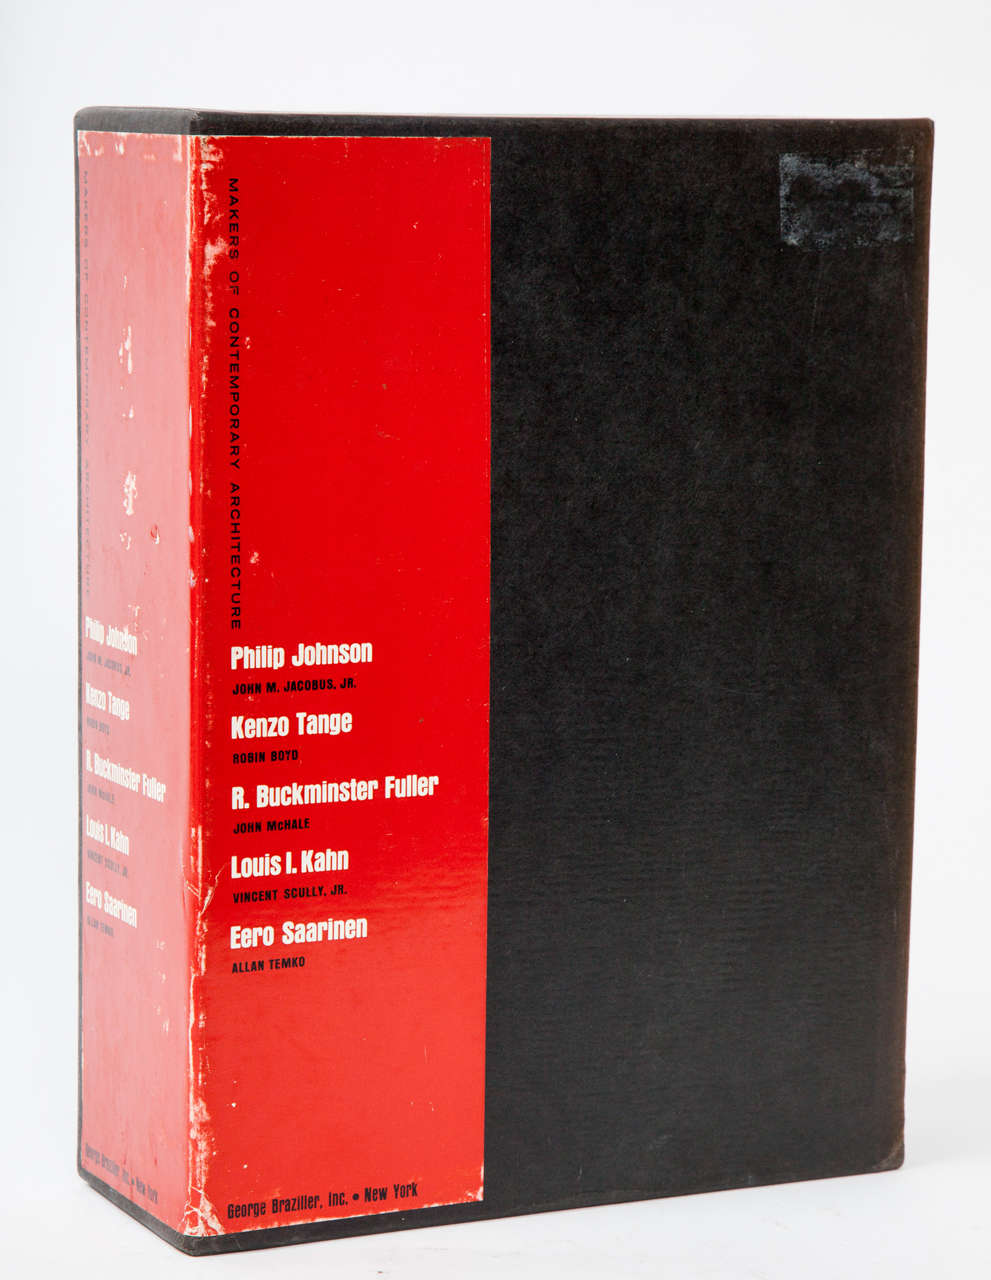 American 20th Century Masters of Architecture Box Sets